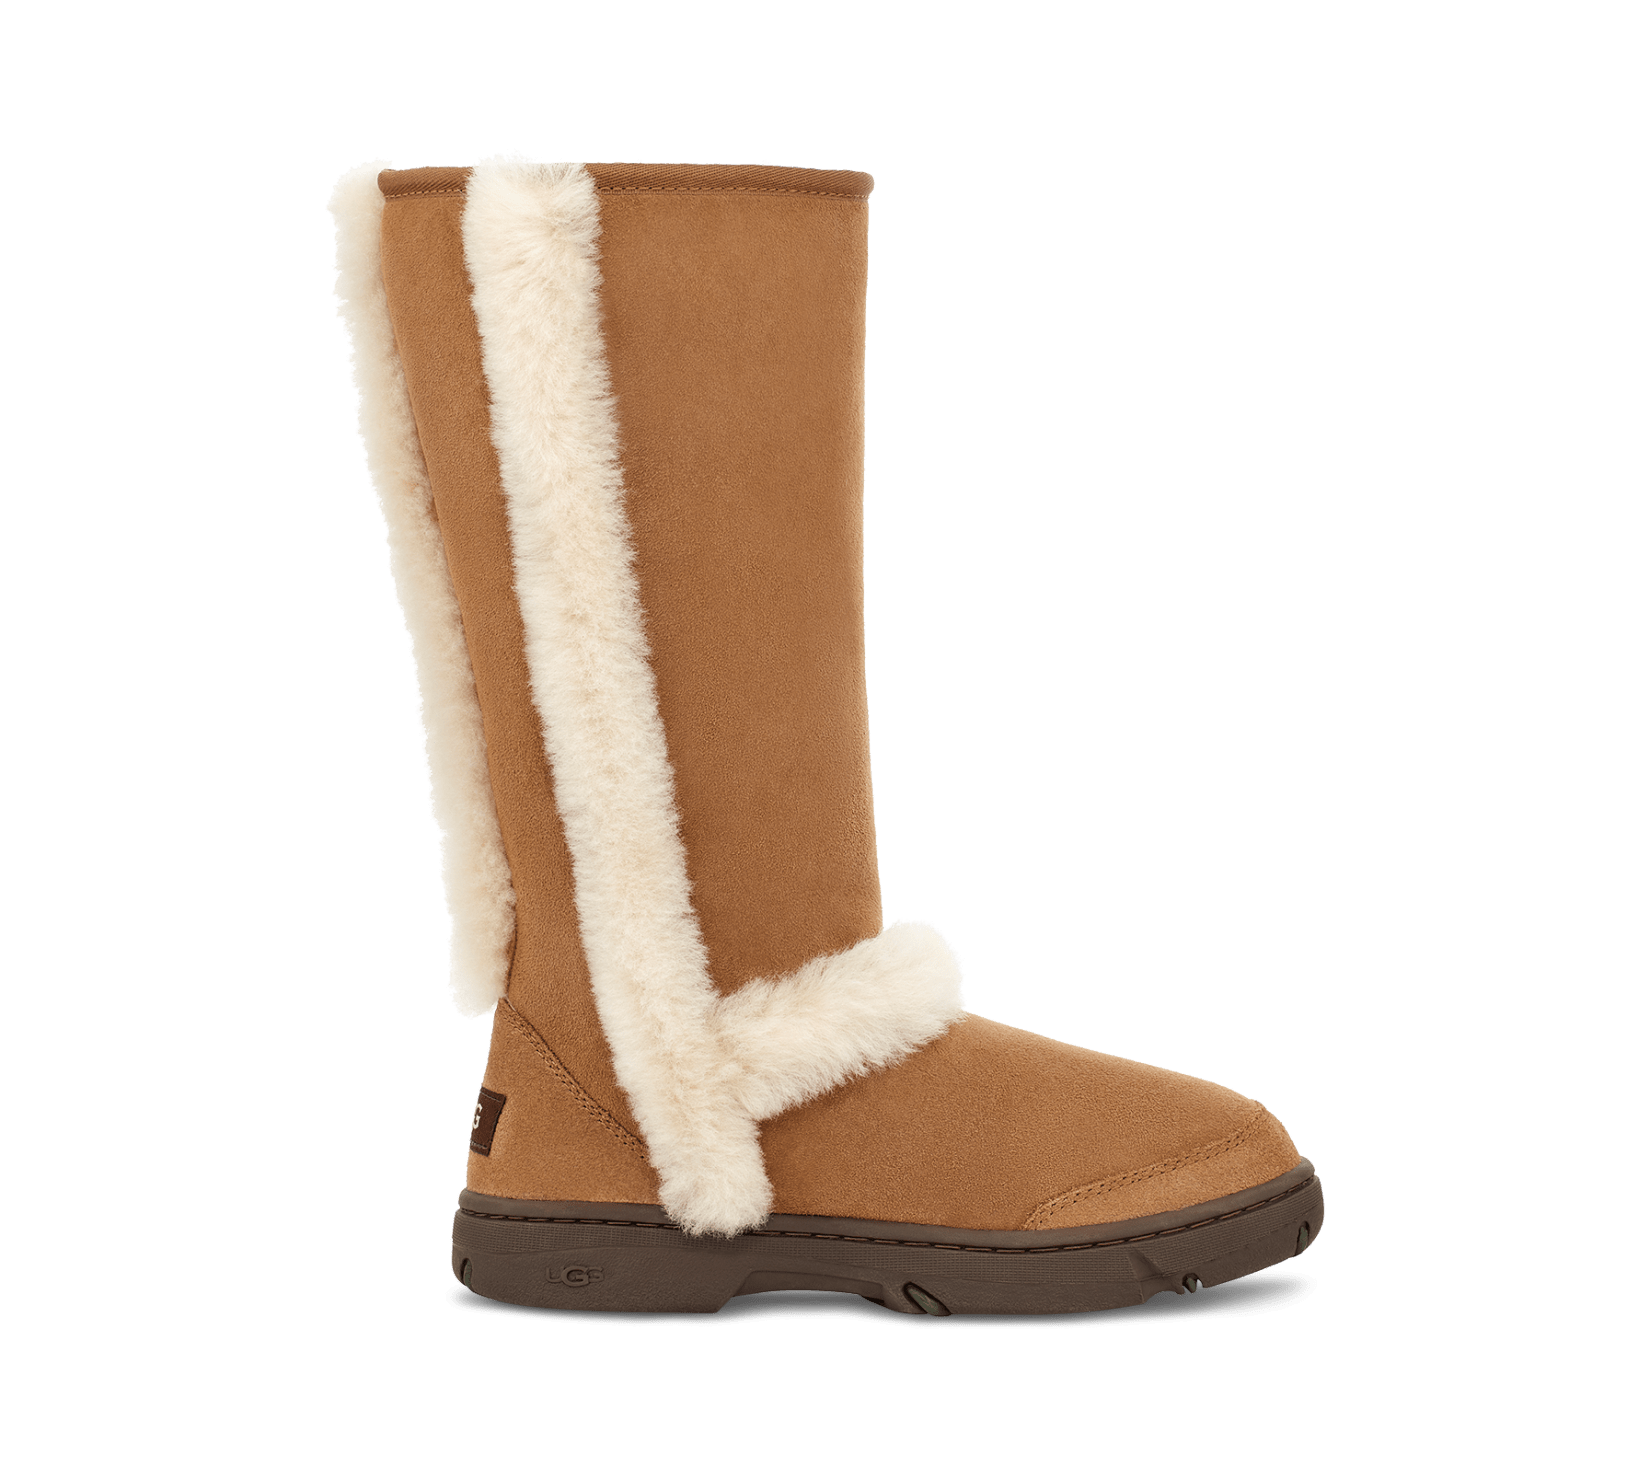 Women's Ugg Boots Brown Size 8 Lined Brand New